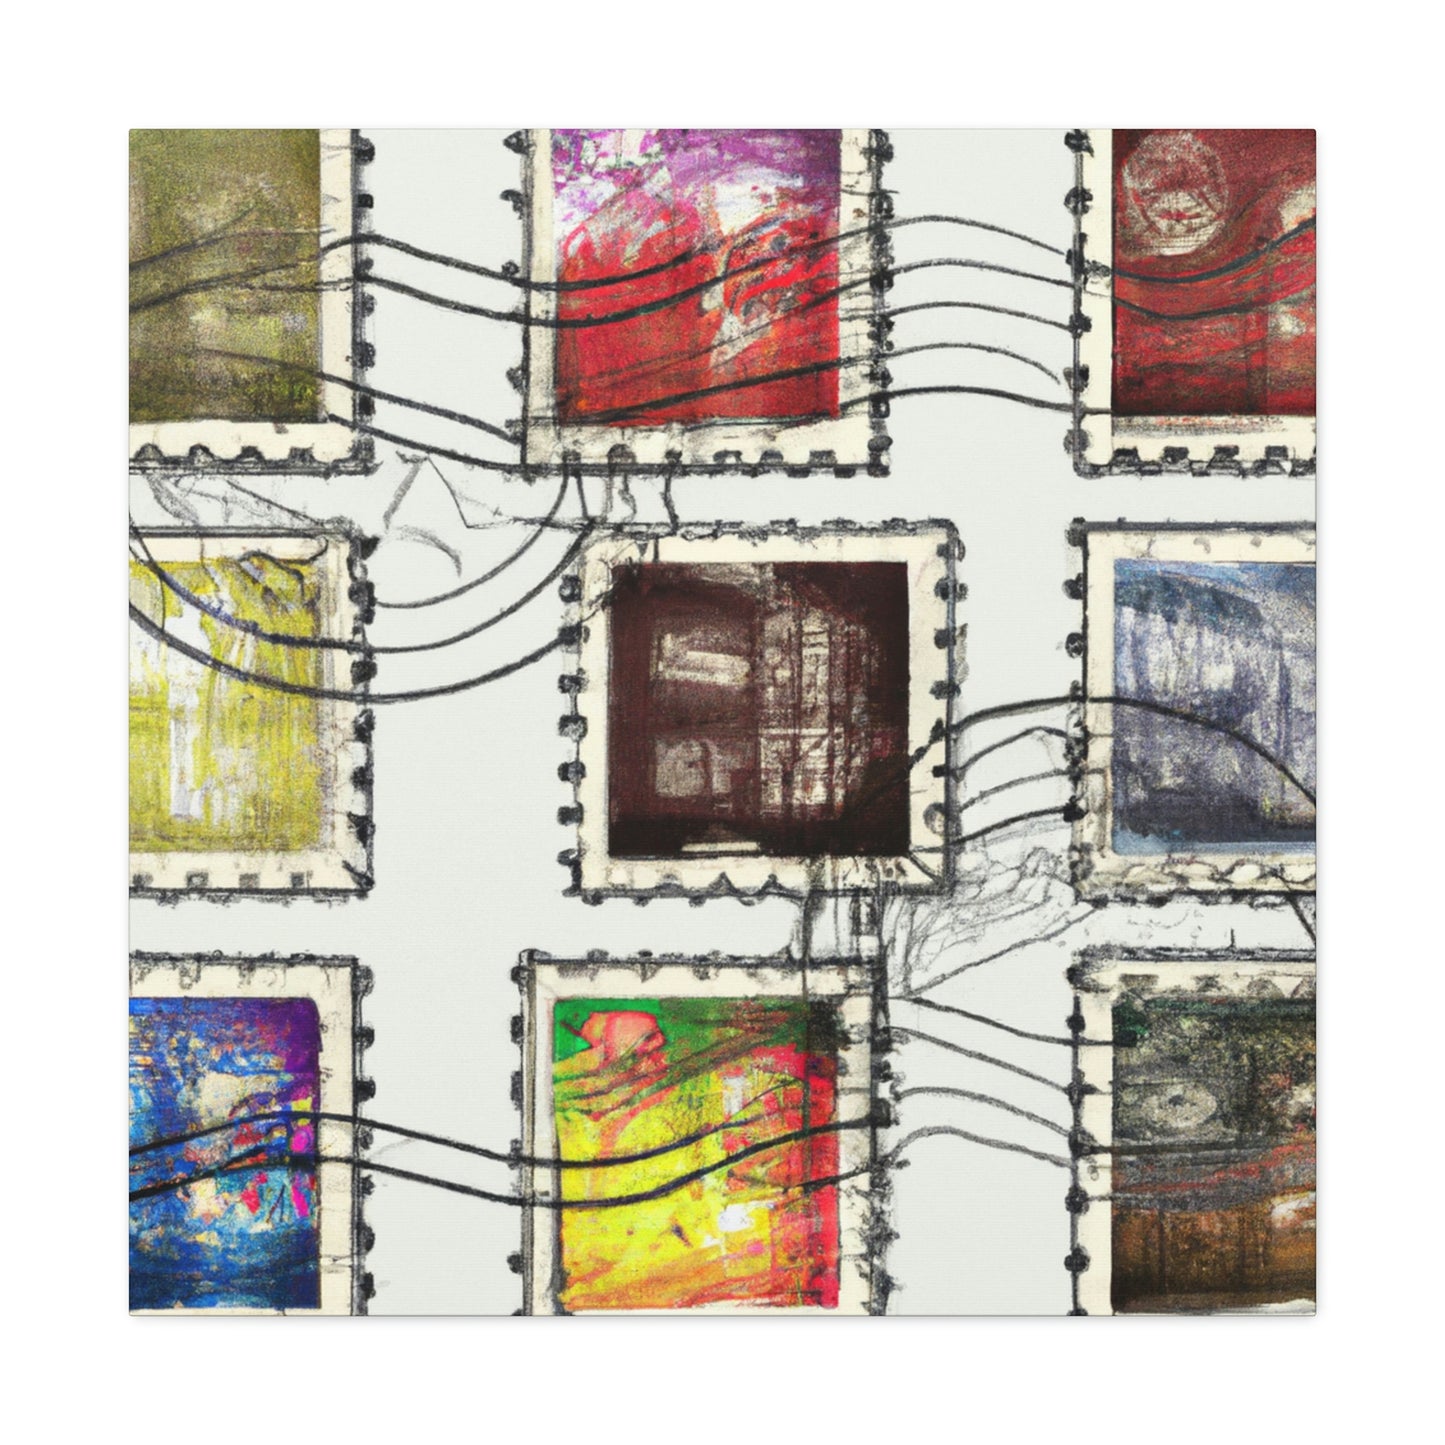 Global Stamp Collection - Canvas